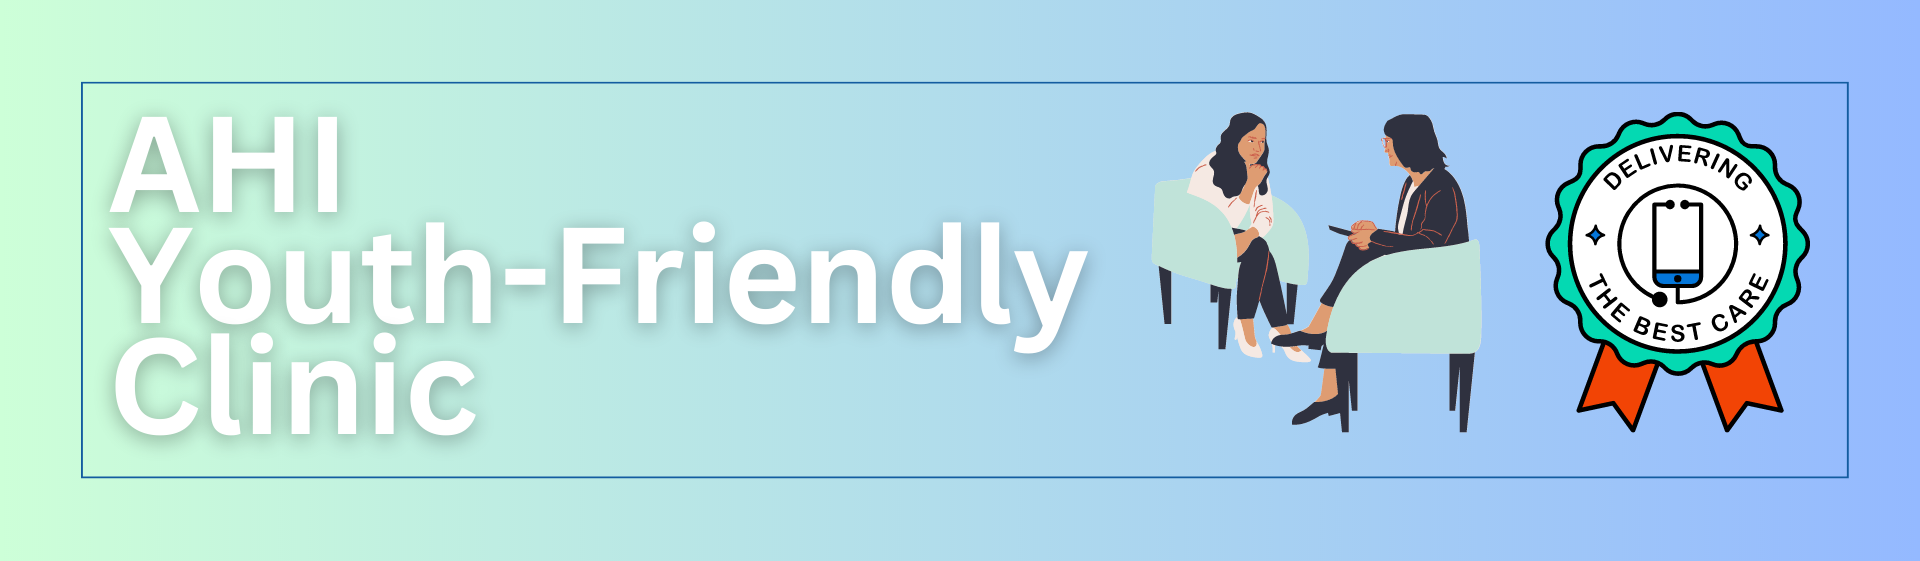 Youth-Friendly-Clinic-Webpage-Banner-crop-1